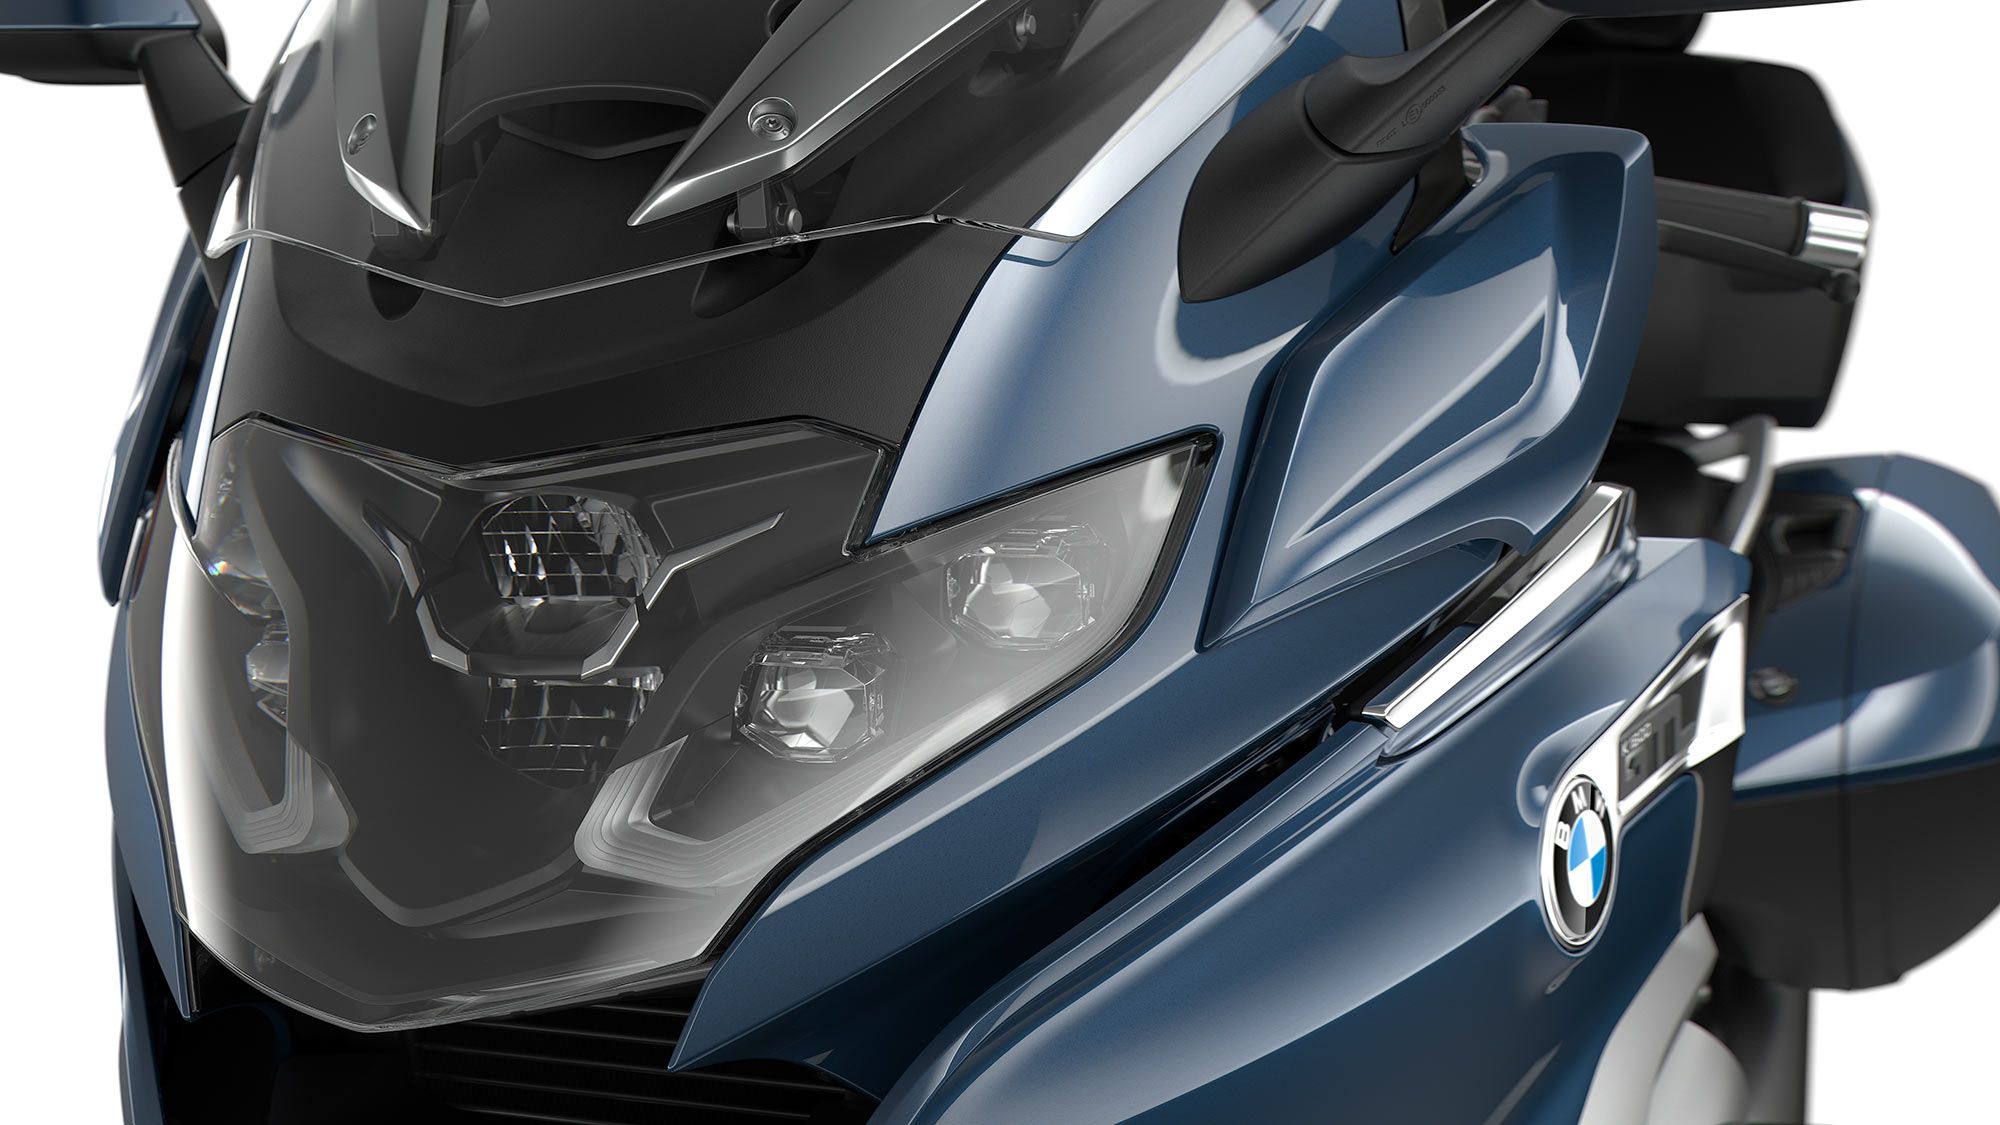 Each model gets updated LED headlights with adaptive cornering function.